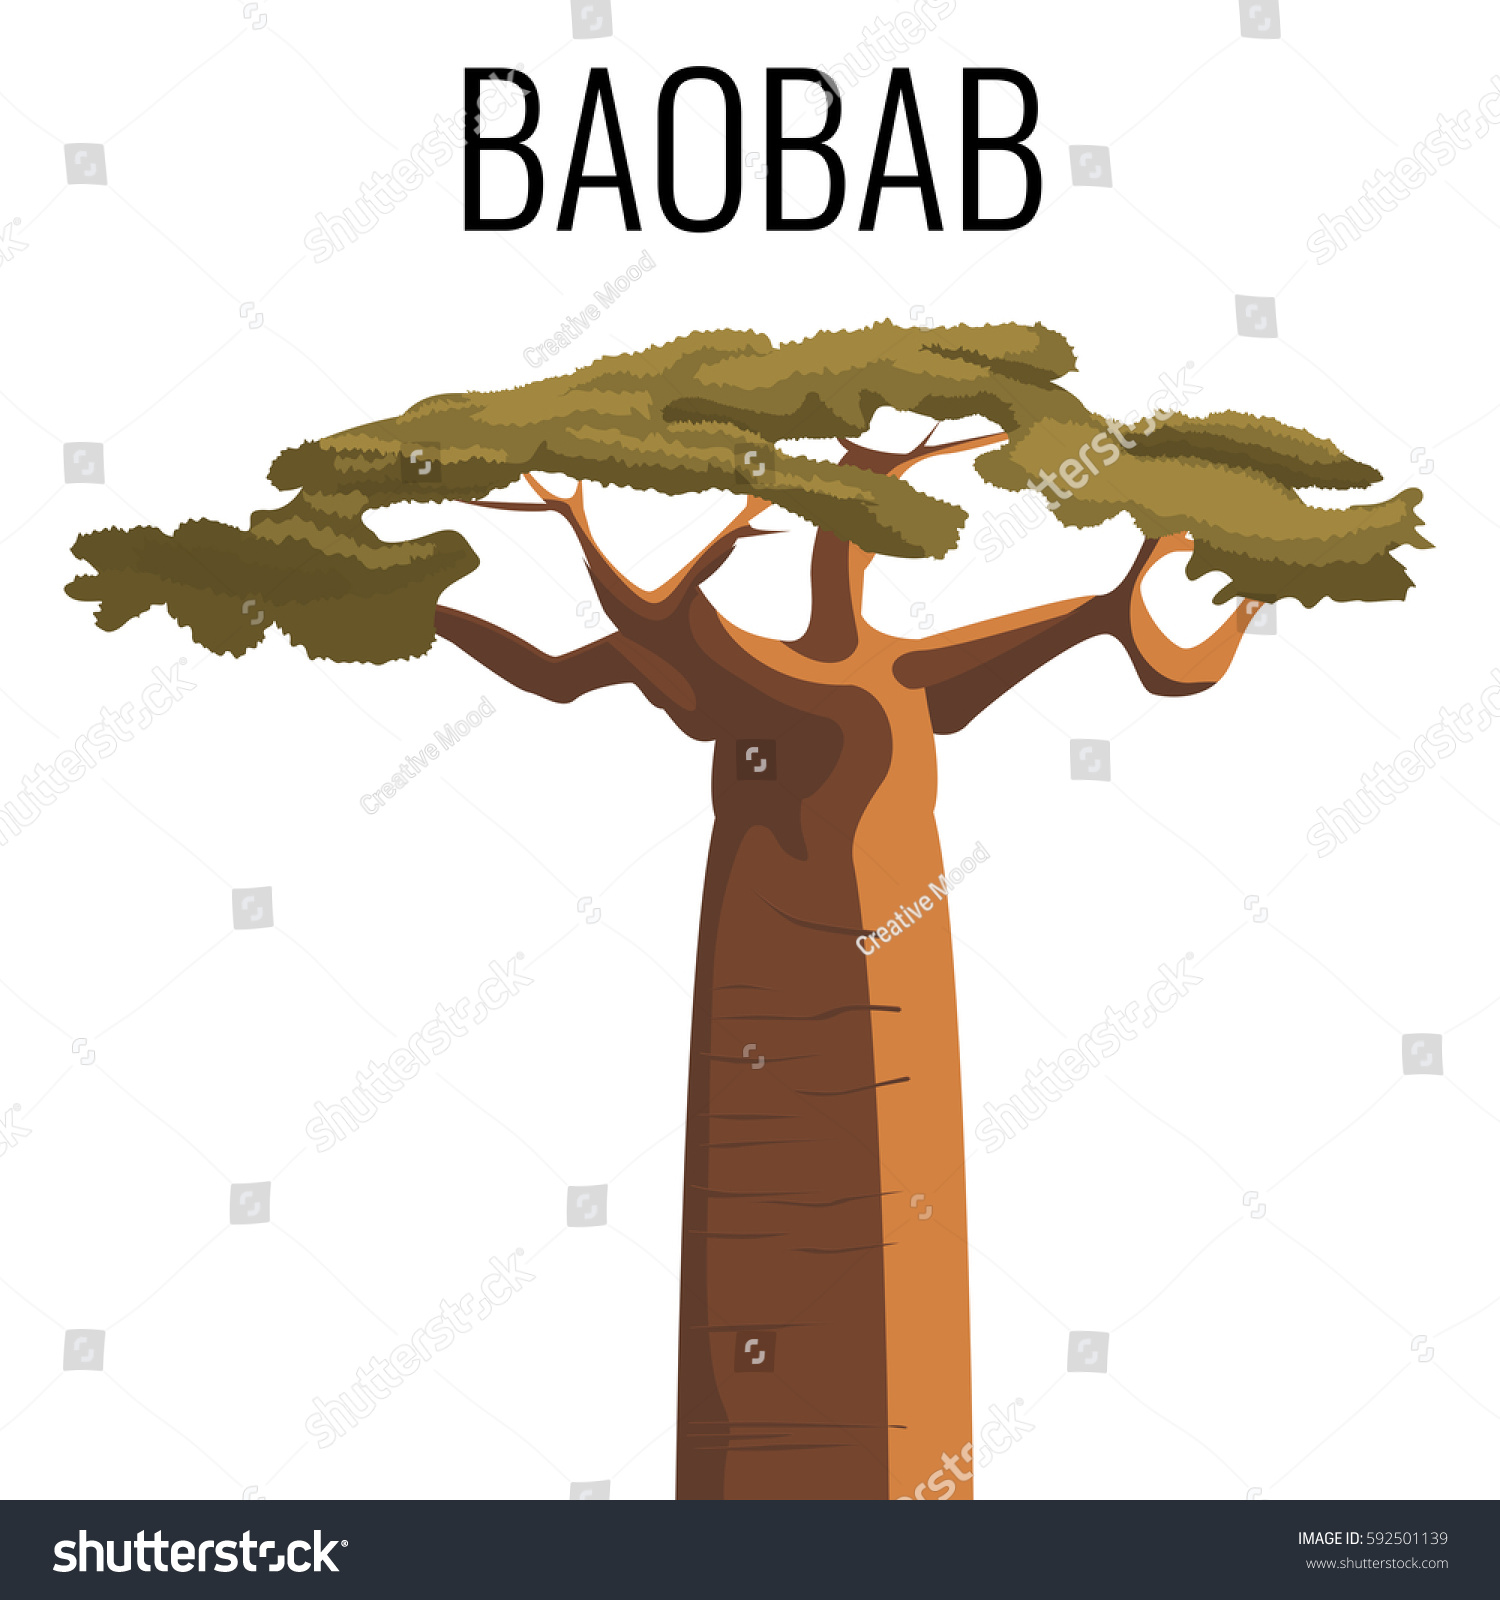 SVG of African baobab tree icon color emblem with text isolated on white background. Vector illustration of powerful plant un realistic style svg